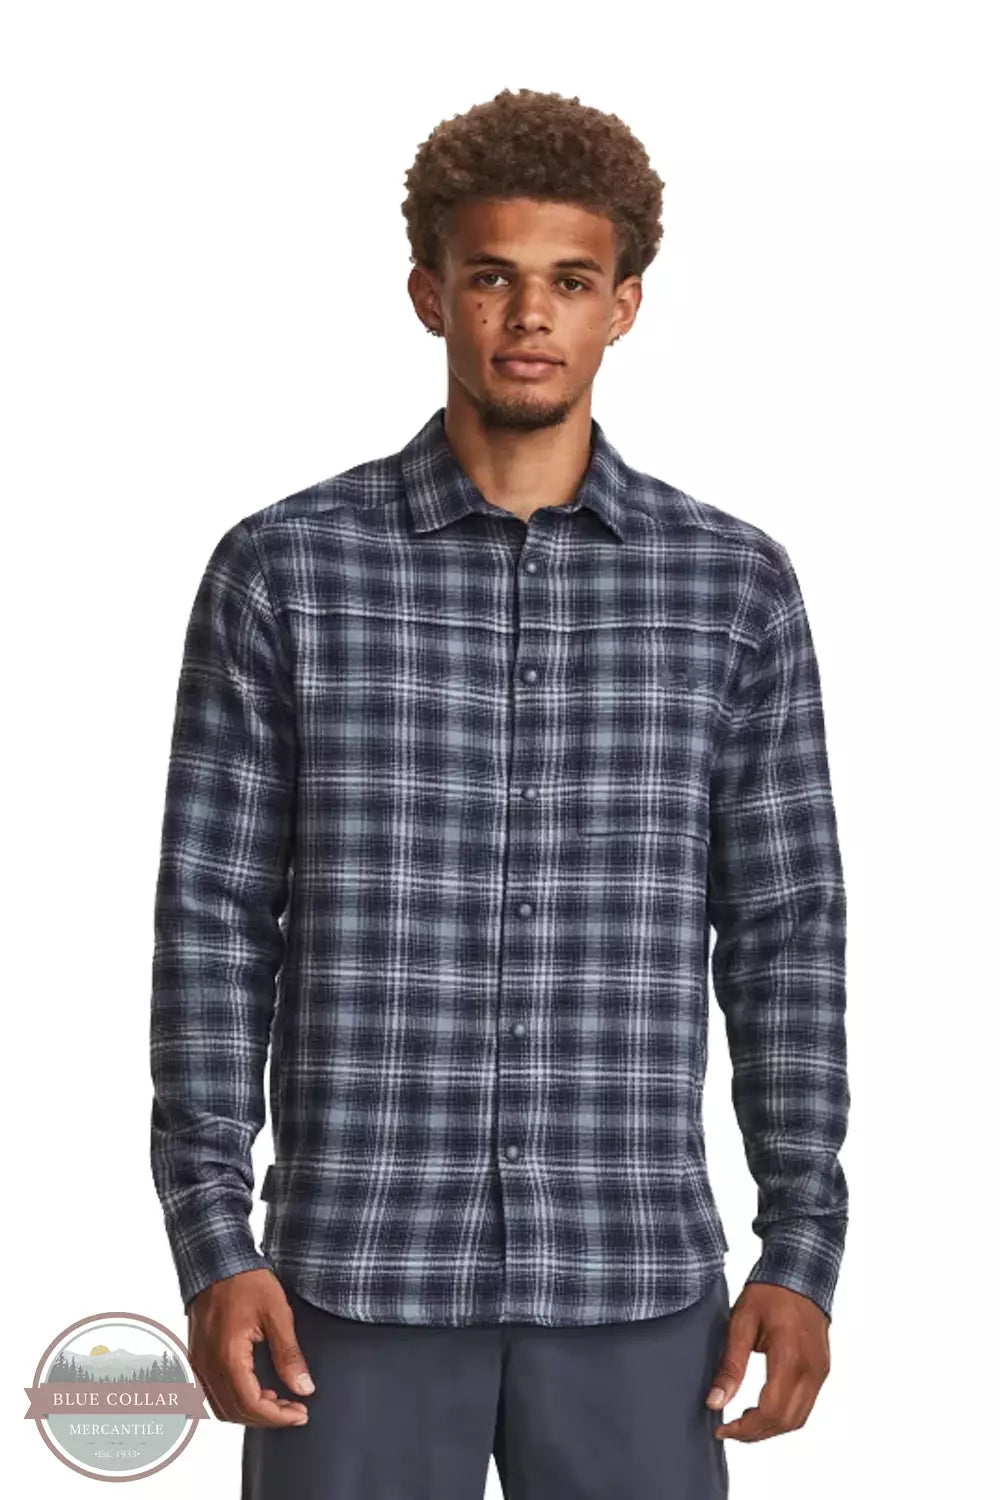 Under Armour 1372600 Tradesman Flex Flannel Long Sleeve Shirt Downpour Gray Front View